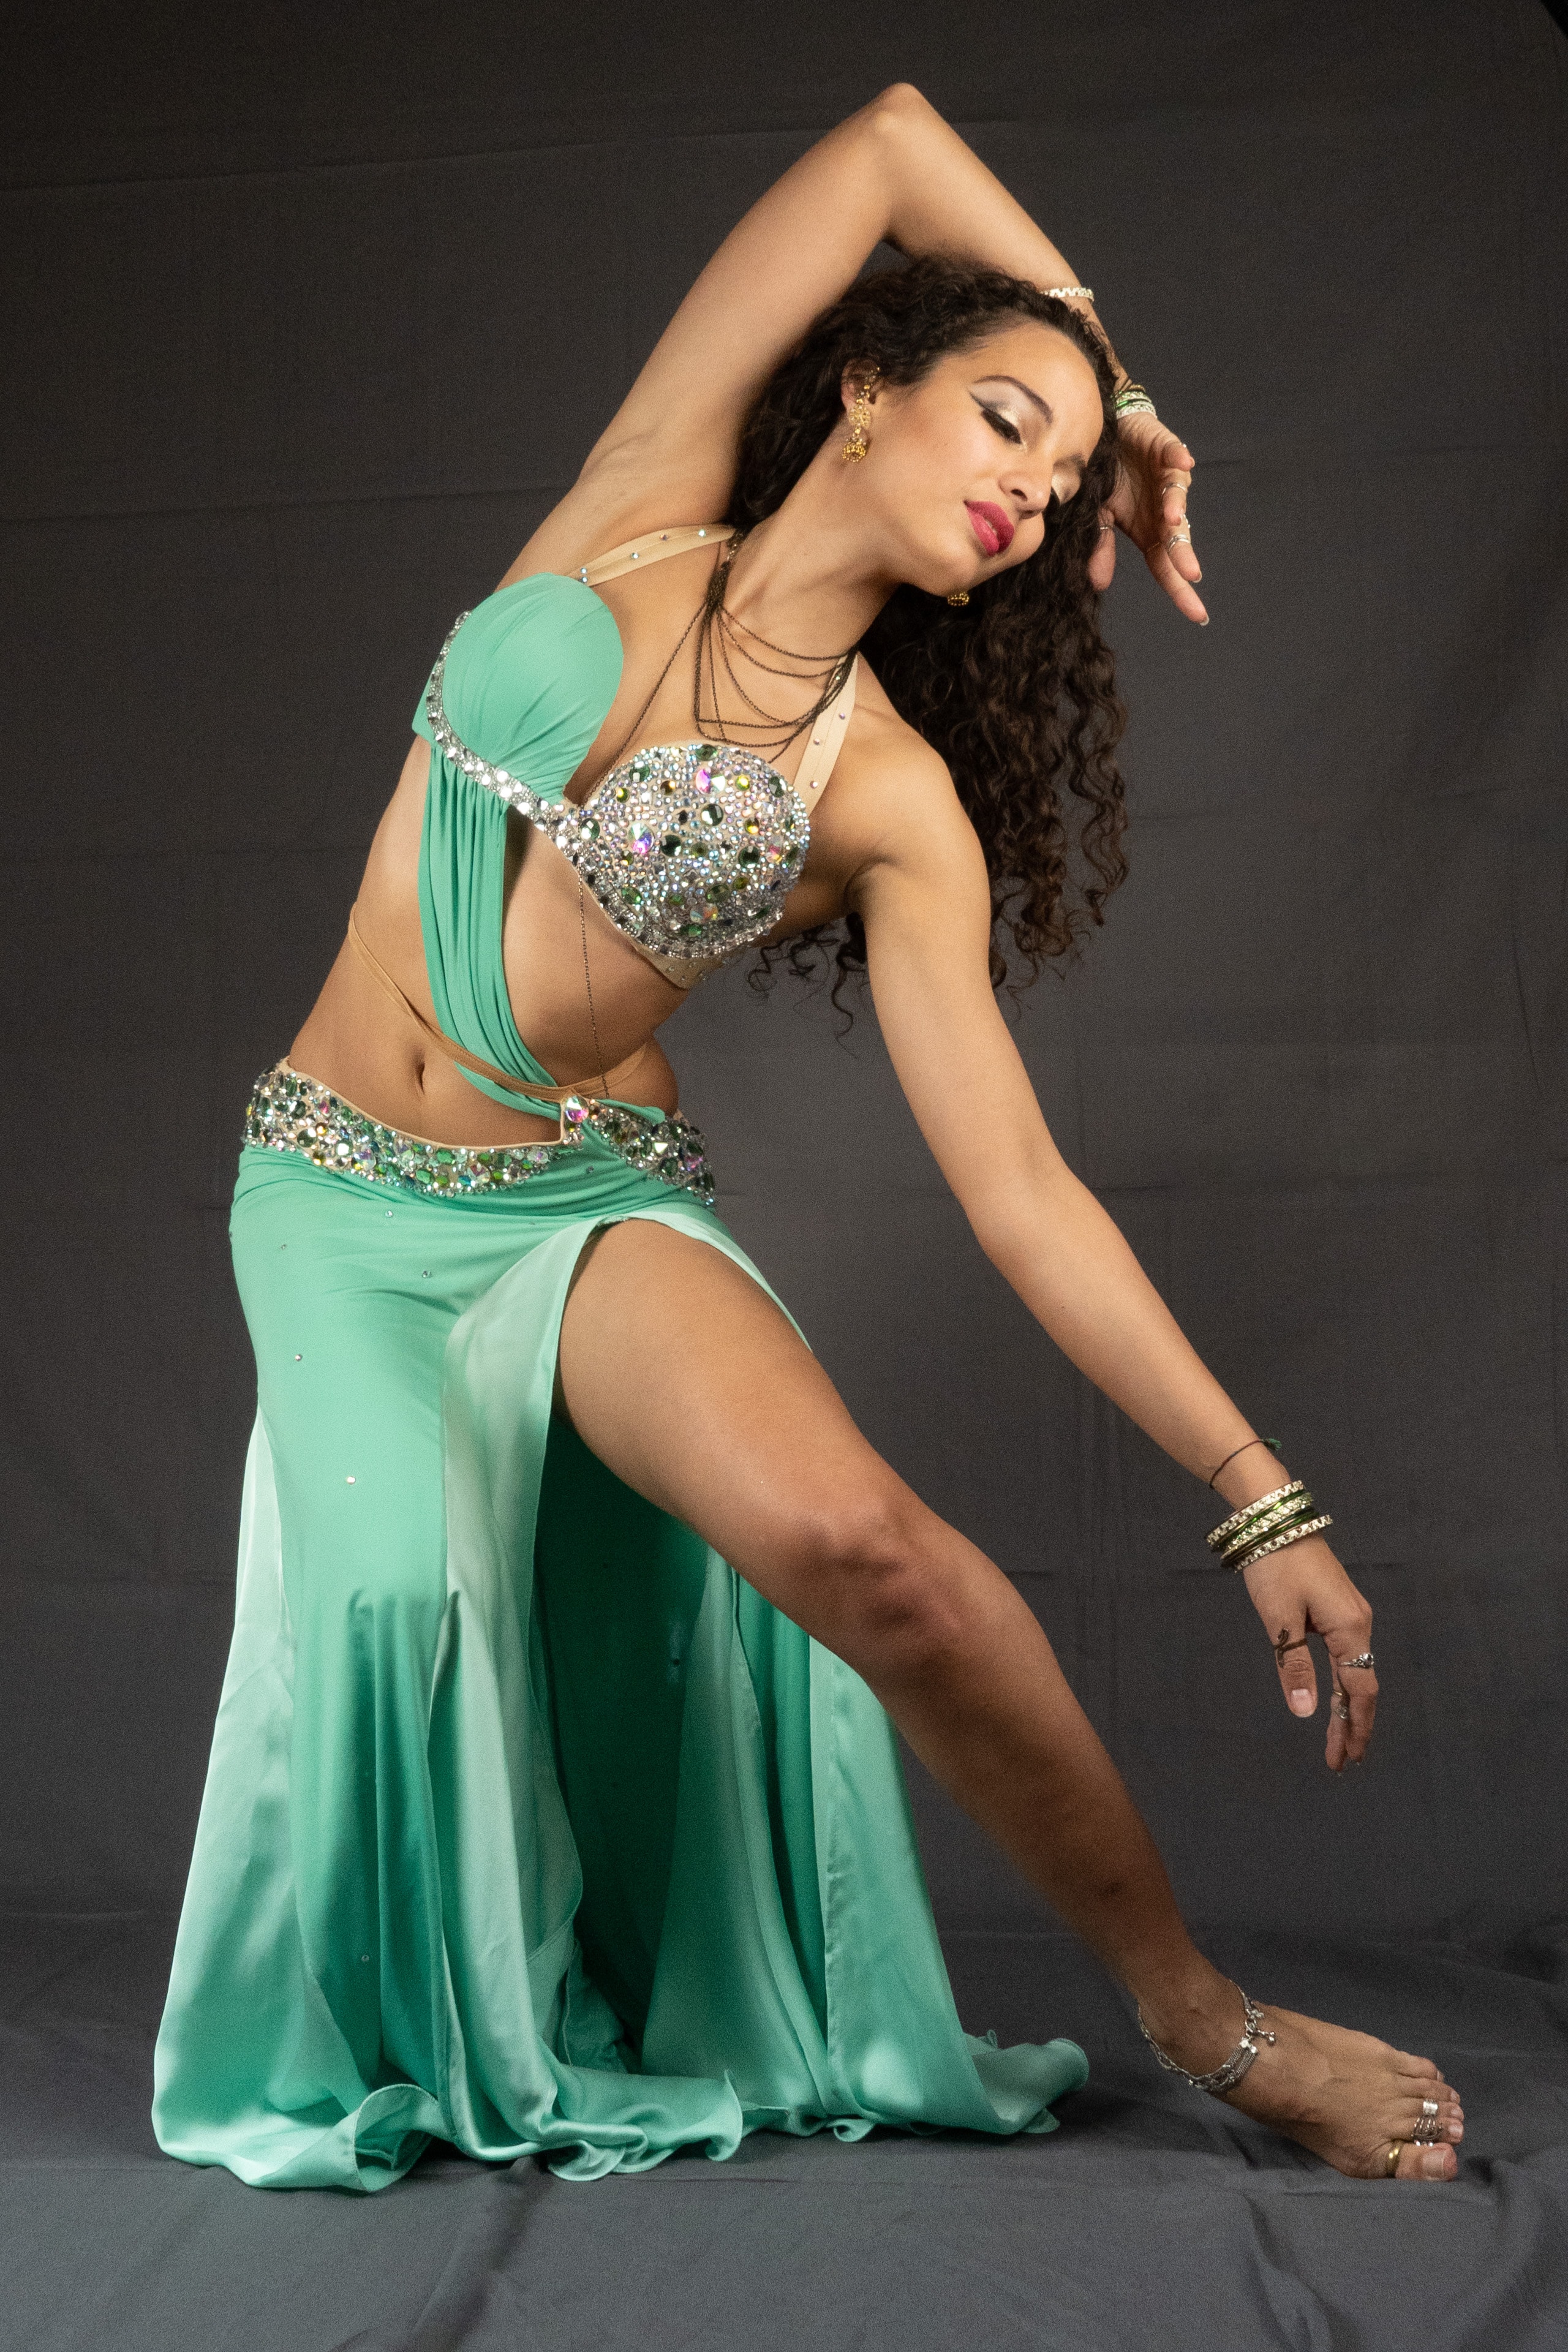 Stunning Mix of Bellydance & Bollywood with Exciting Costume Changes